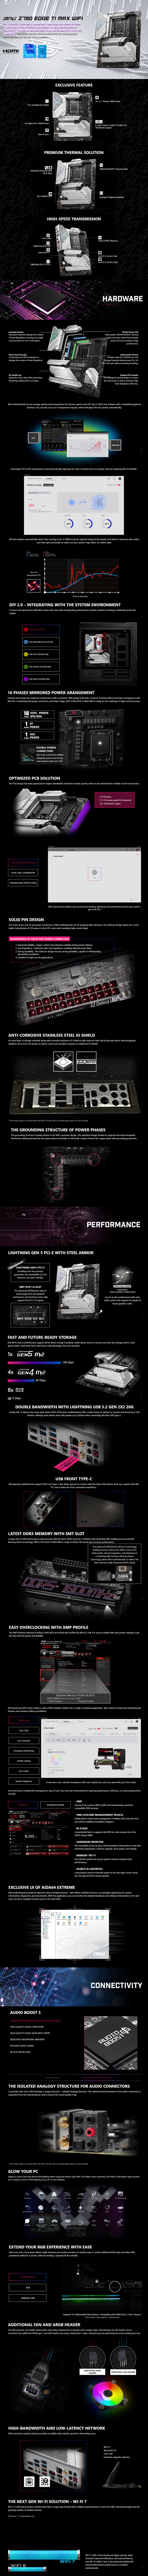 A large marketing image providing additional information about the product MSI MPG Z790 Edge TI Max Wifi LGA1700 ATX Desktop Motherboard - Additional alt info not provided